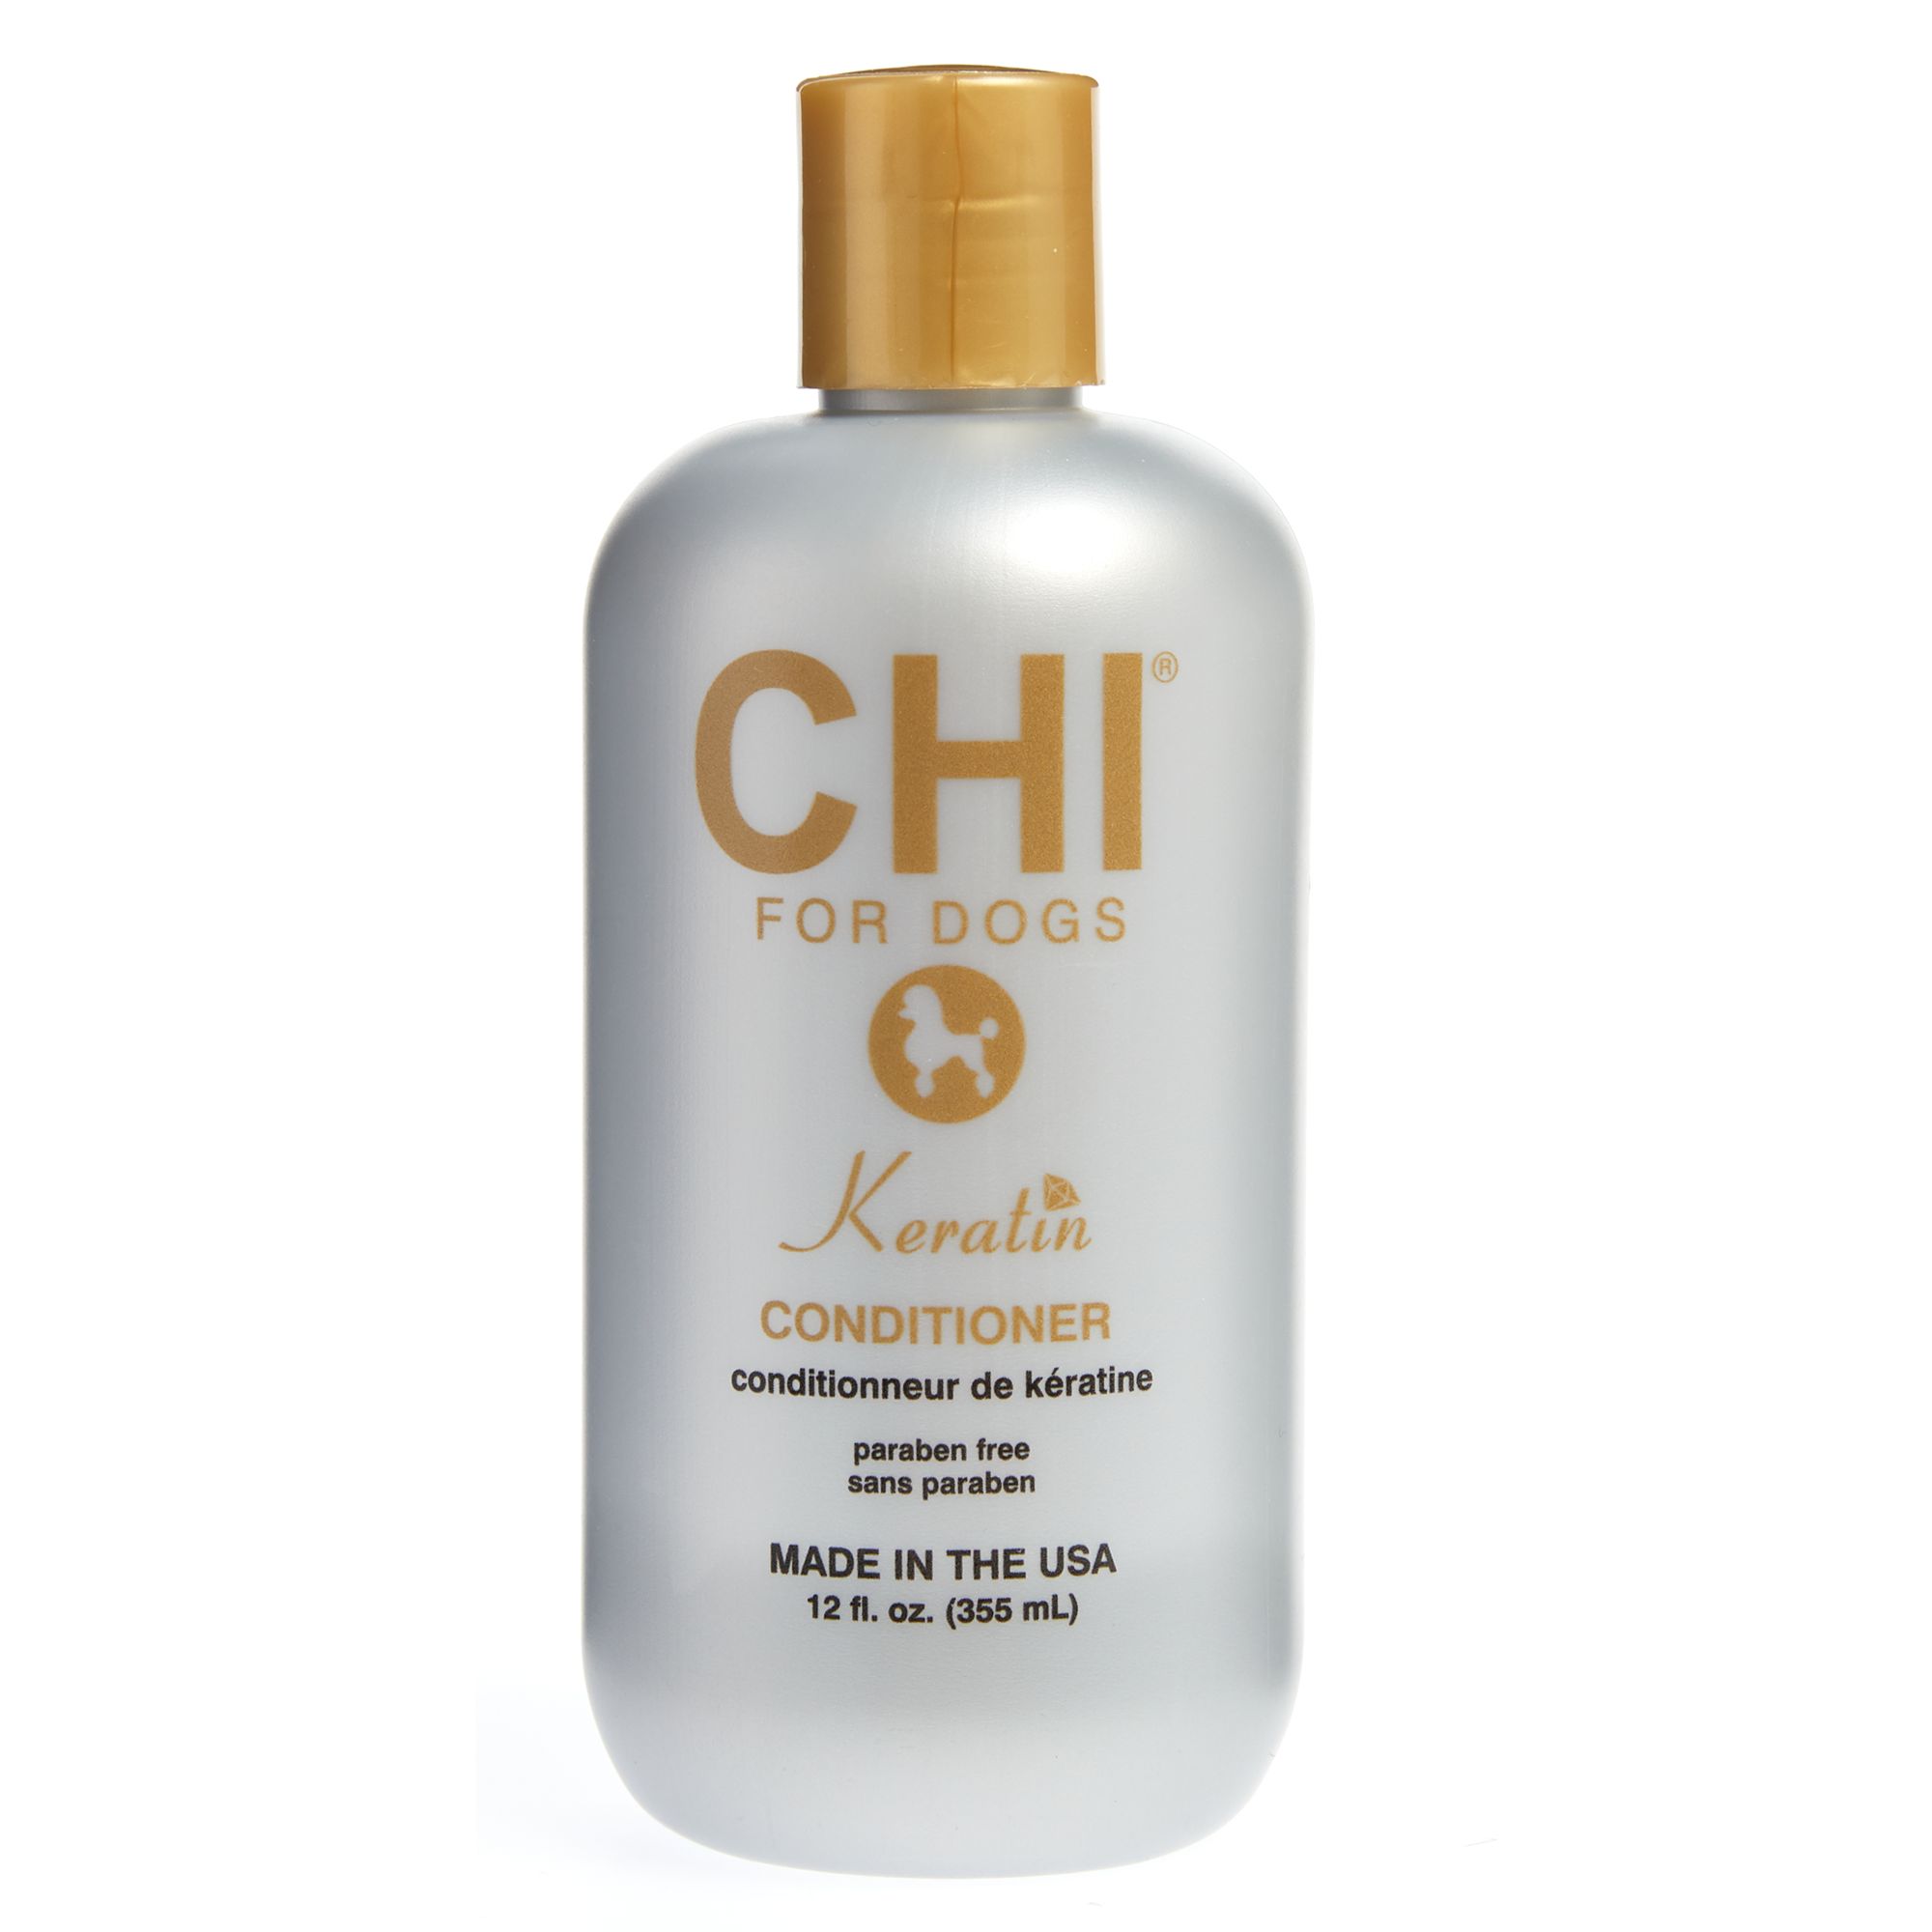 CHI® for Dogs Keratin Conditioner | dog 